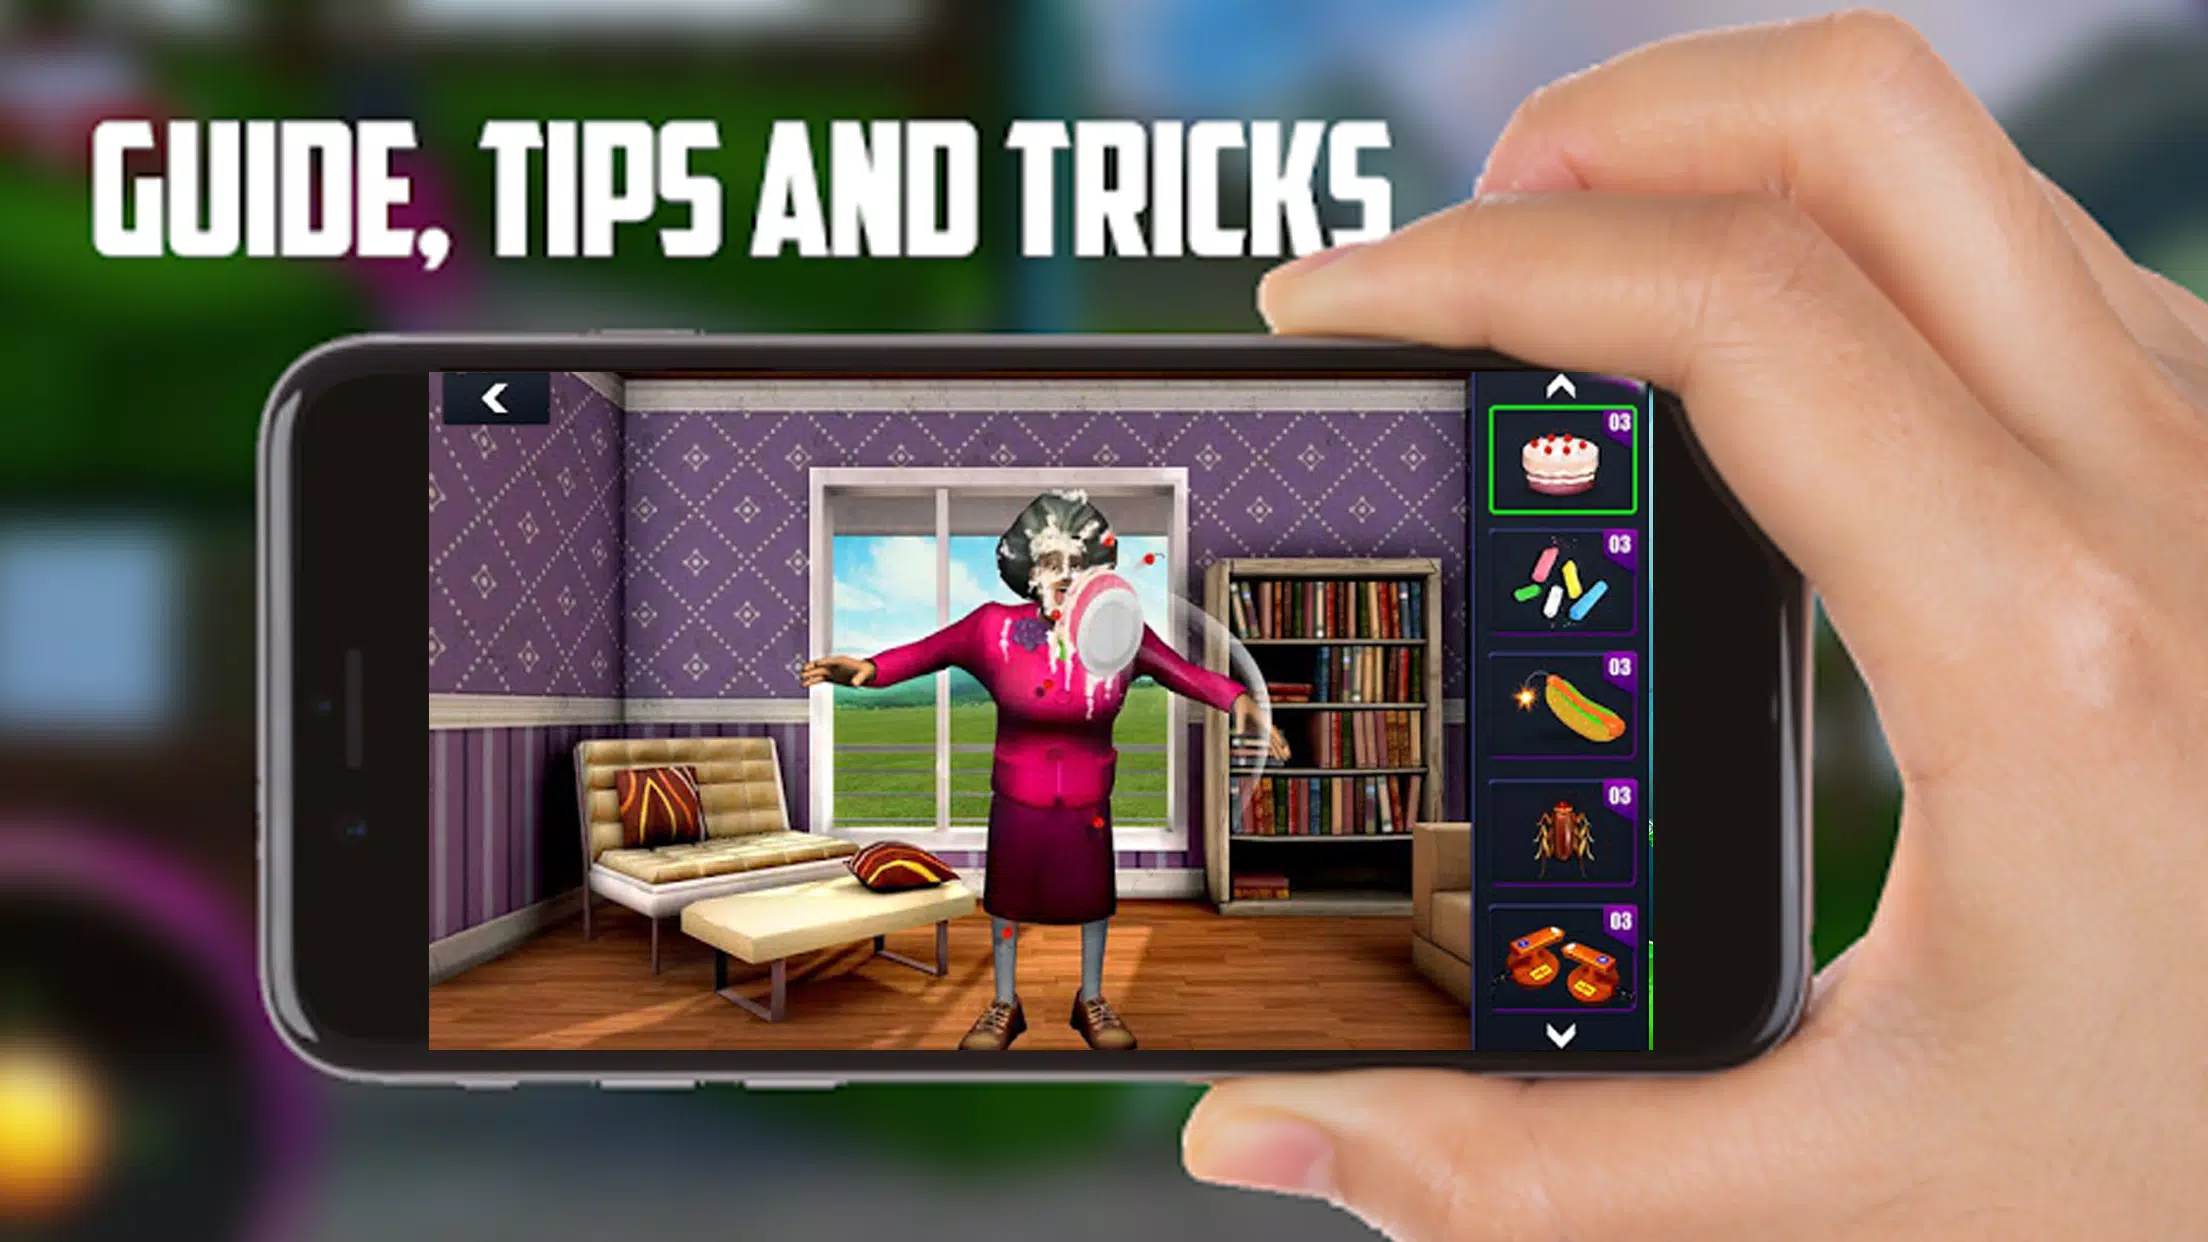 App Guide for Scary Teacher 3D 2020 Android app 2020 